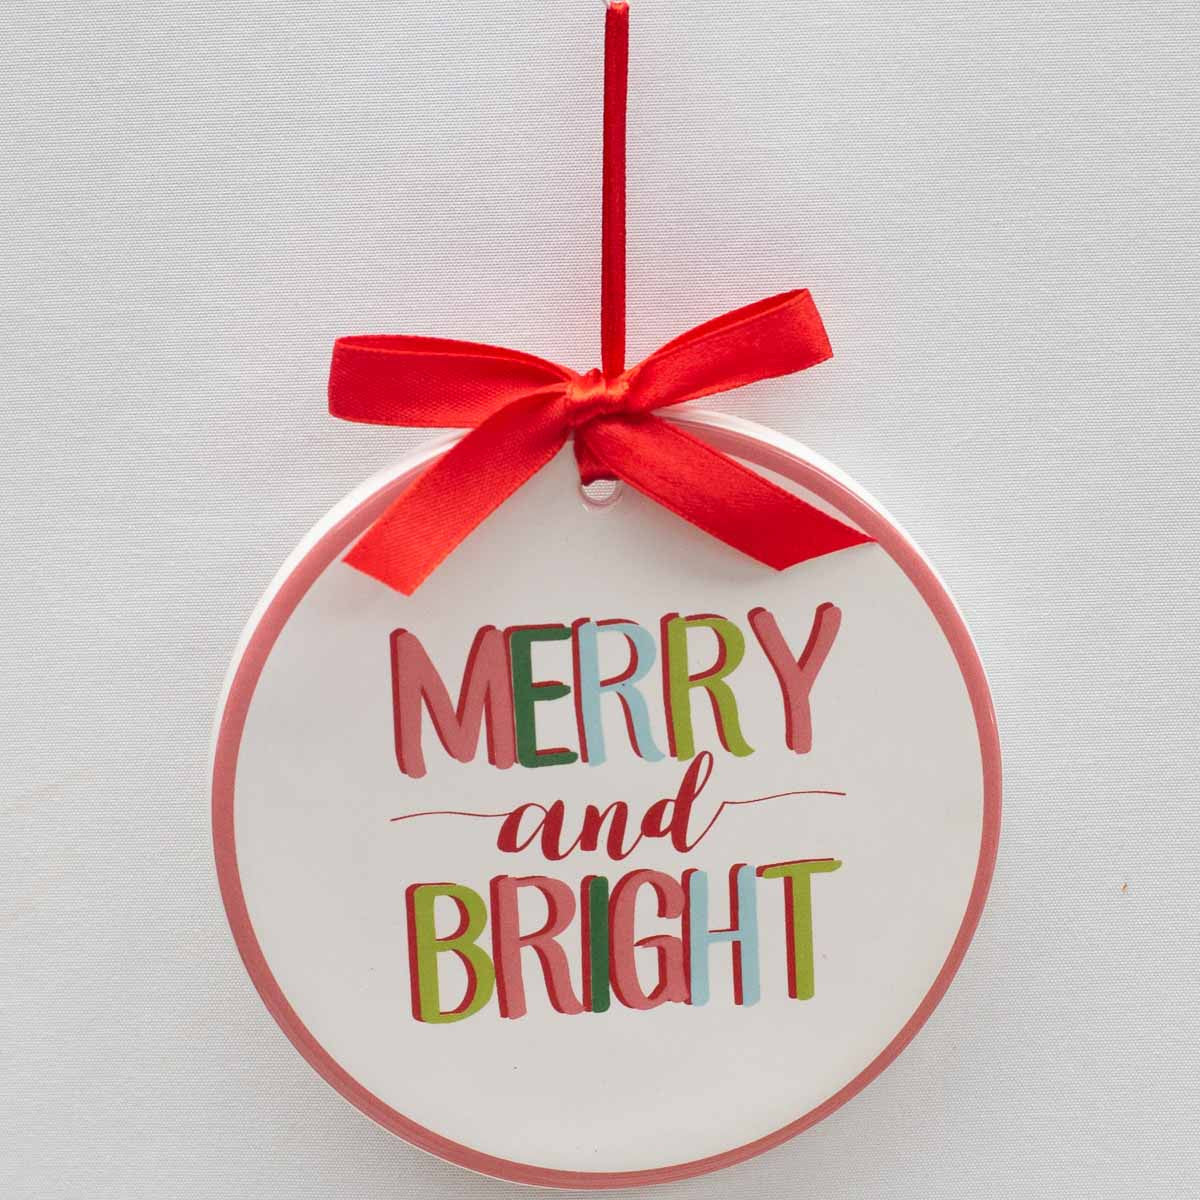 Merry & Bright Ornament | DOORBUSTER-Ornament-The Royal Standard-The Village Shoppe, Women’s Fashion Boutique, Shop Online and In Store - Located in Muscle Shoals, AL.